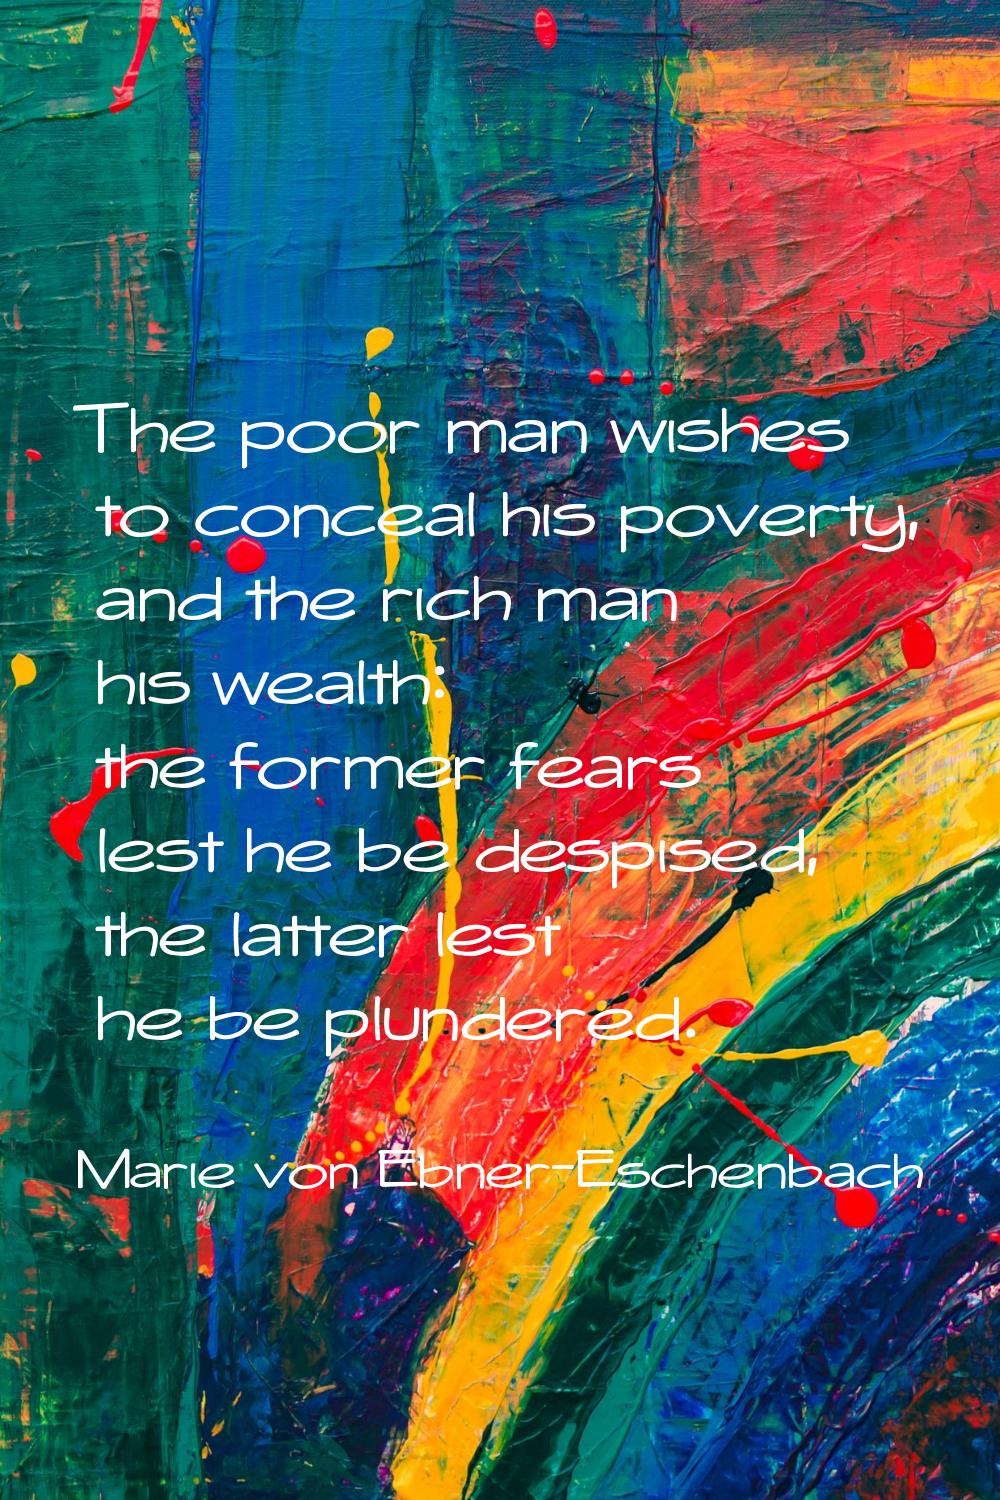 The poor man wishes to conceal his poverty, and the rich man his wealth: the former fears lest he b